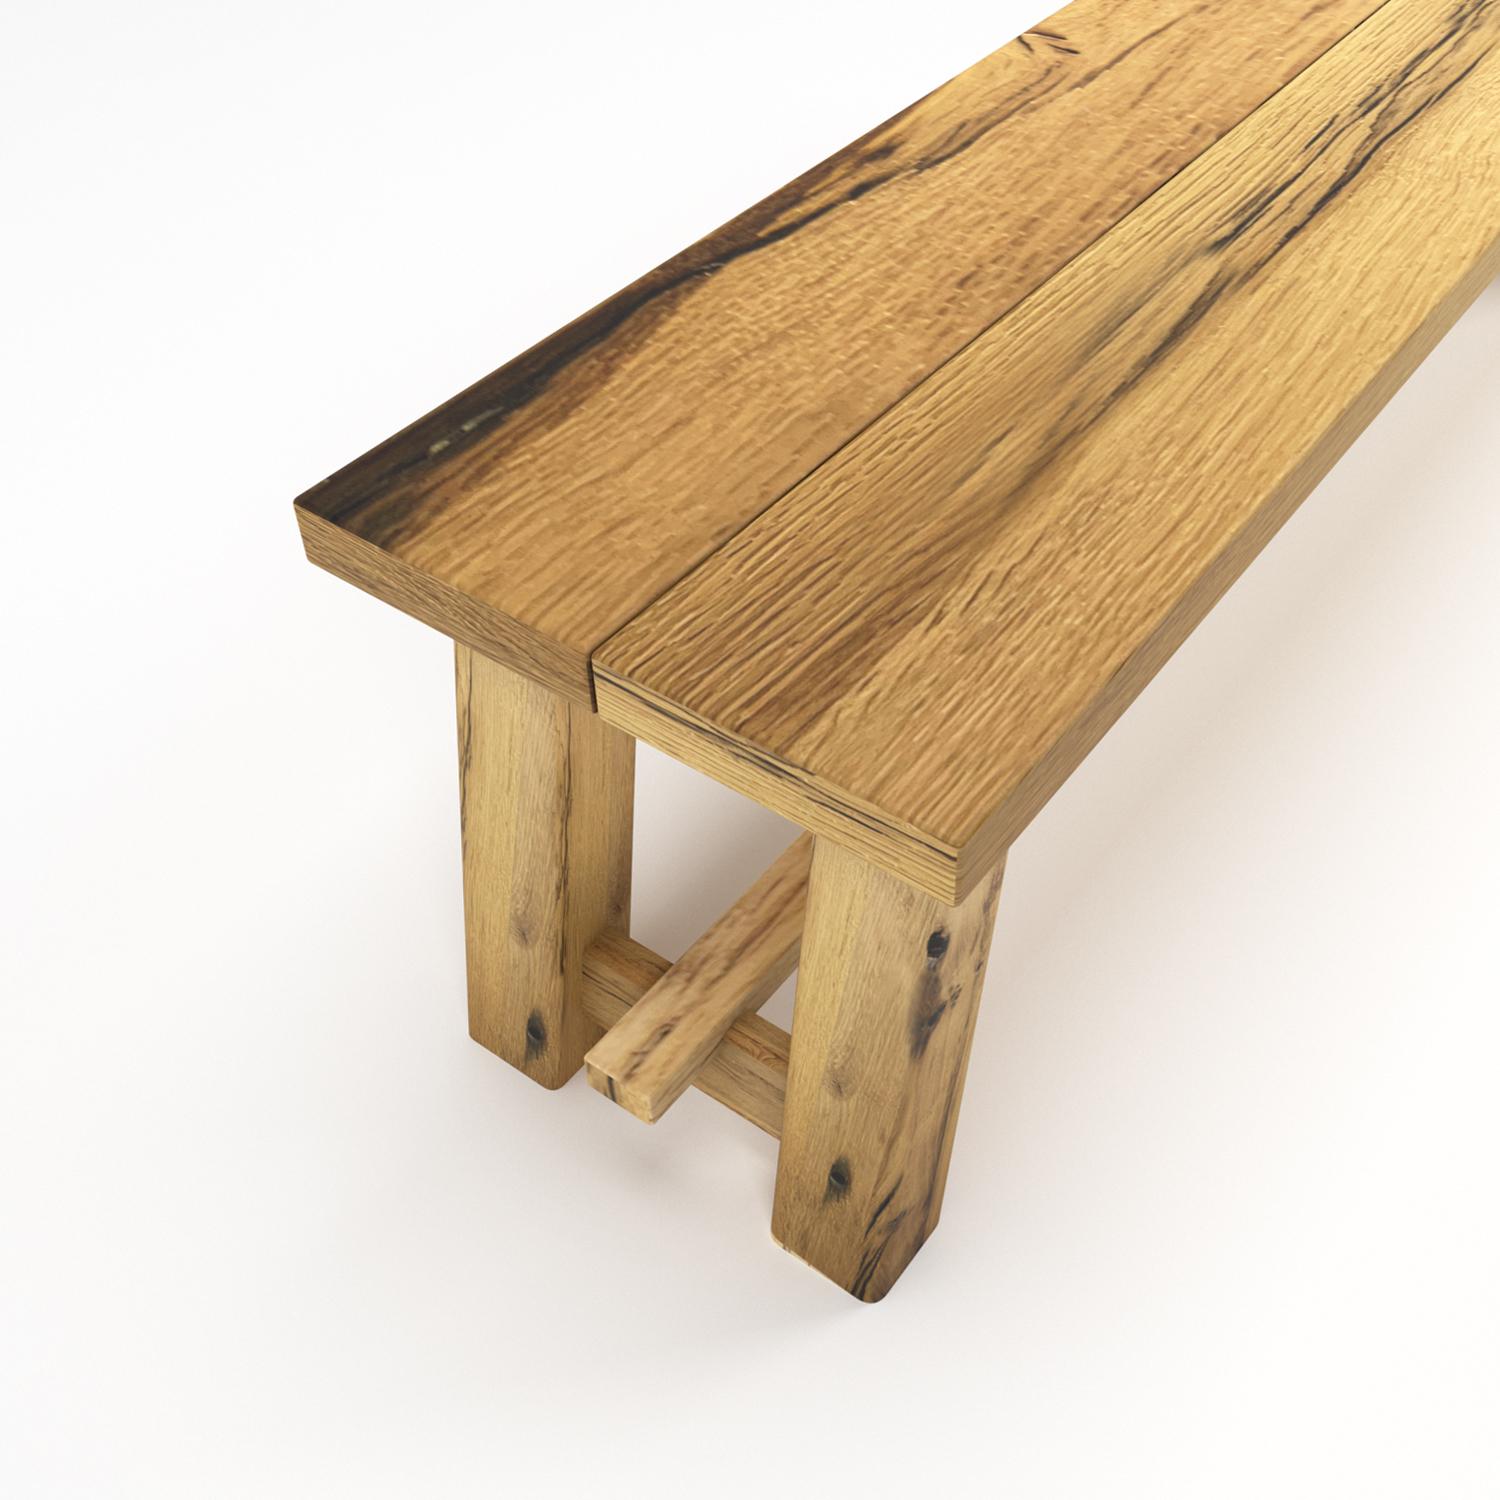 Enjoy a unique dining experience with the Reclaimed Oak Bench. It is crafted from reclaimed massive oak wood, with its origins dating back to the 1830s. The oak's natural wood and beautiful grain makes the bench a stunning addition to any home.

All